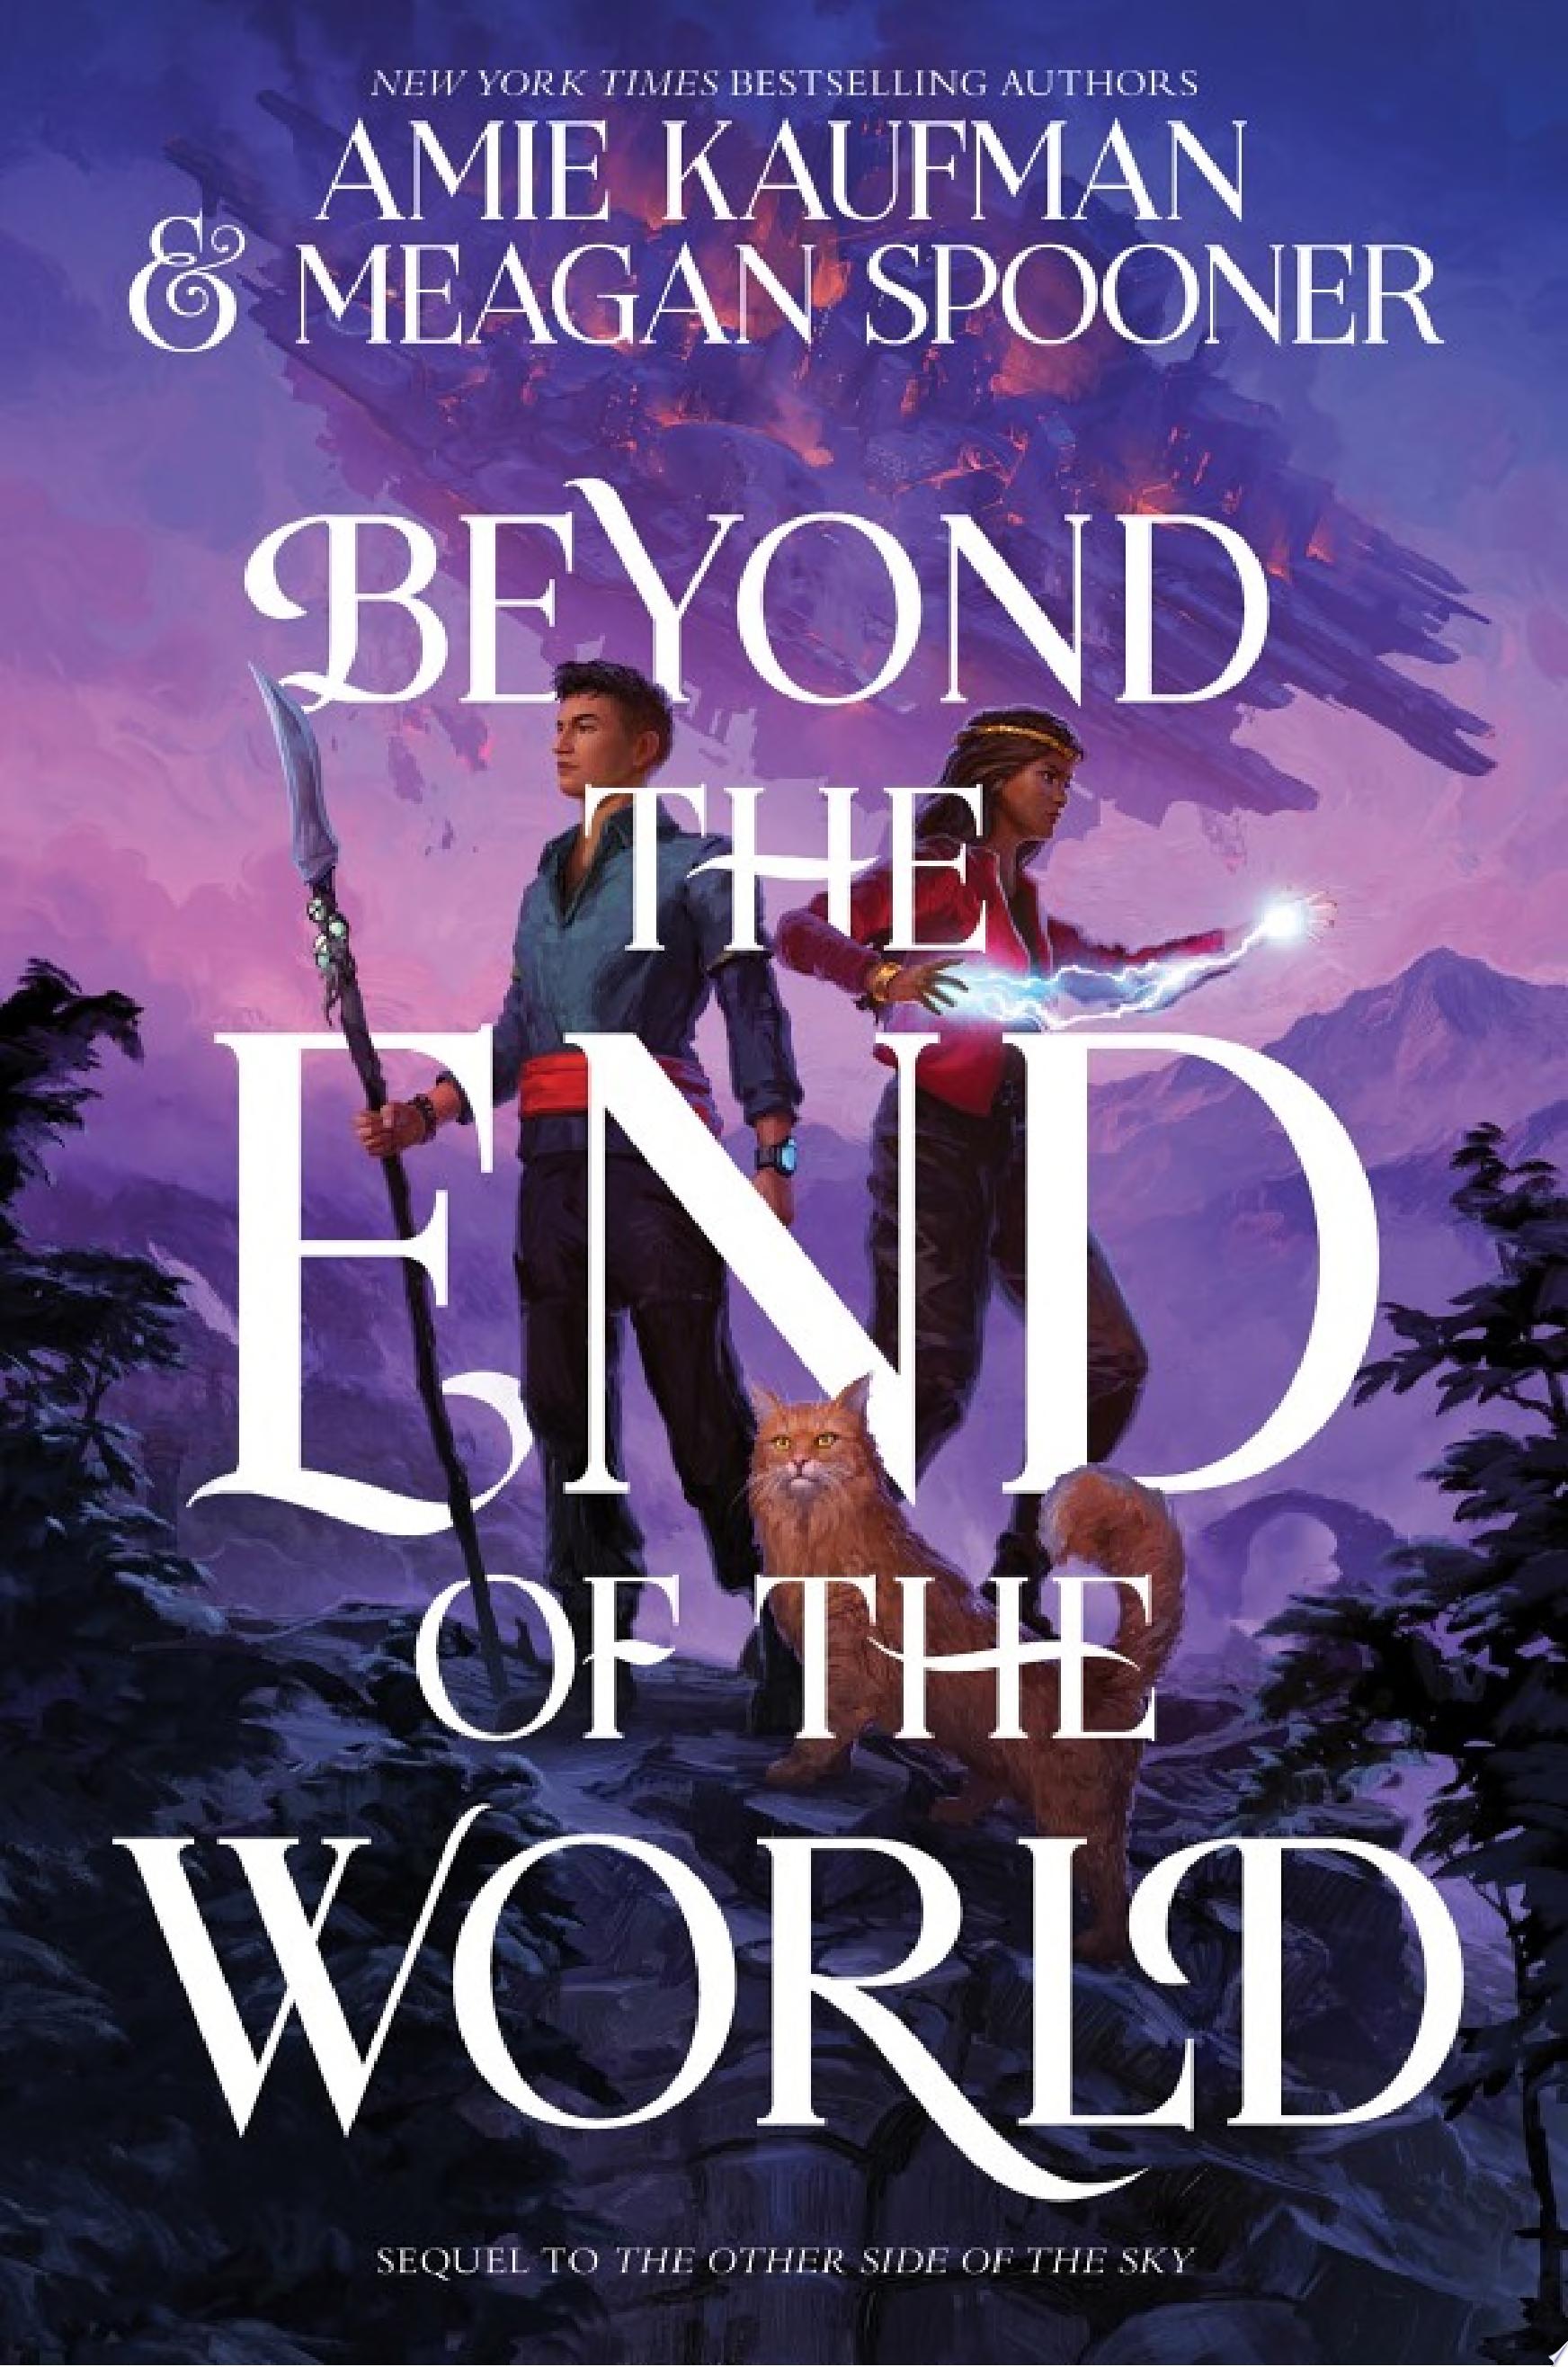 Image for "Beyond the End of the World"